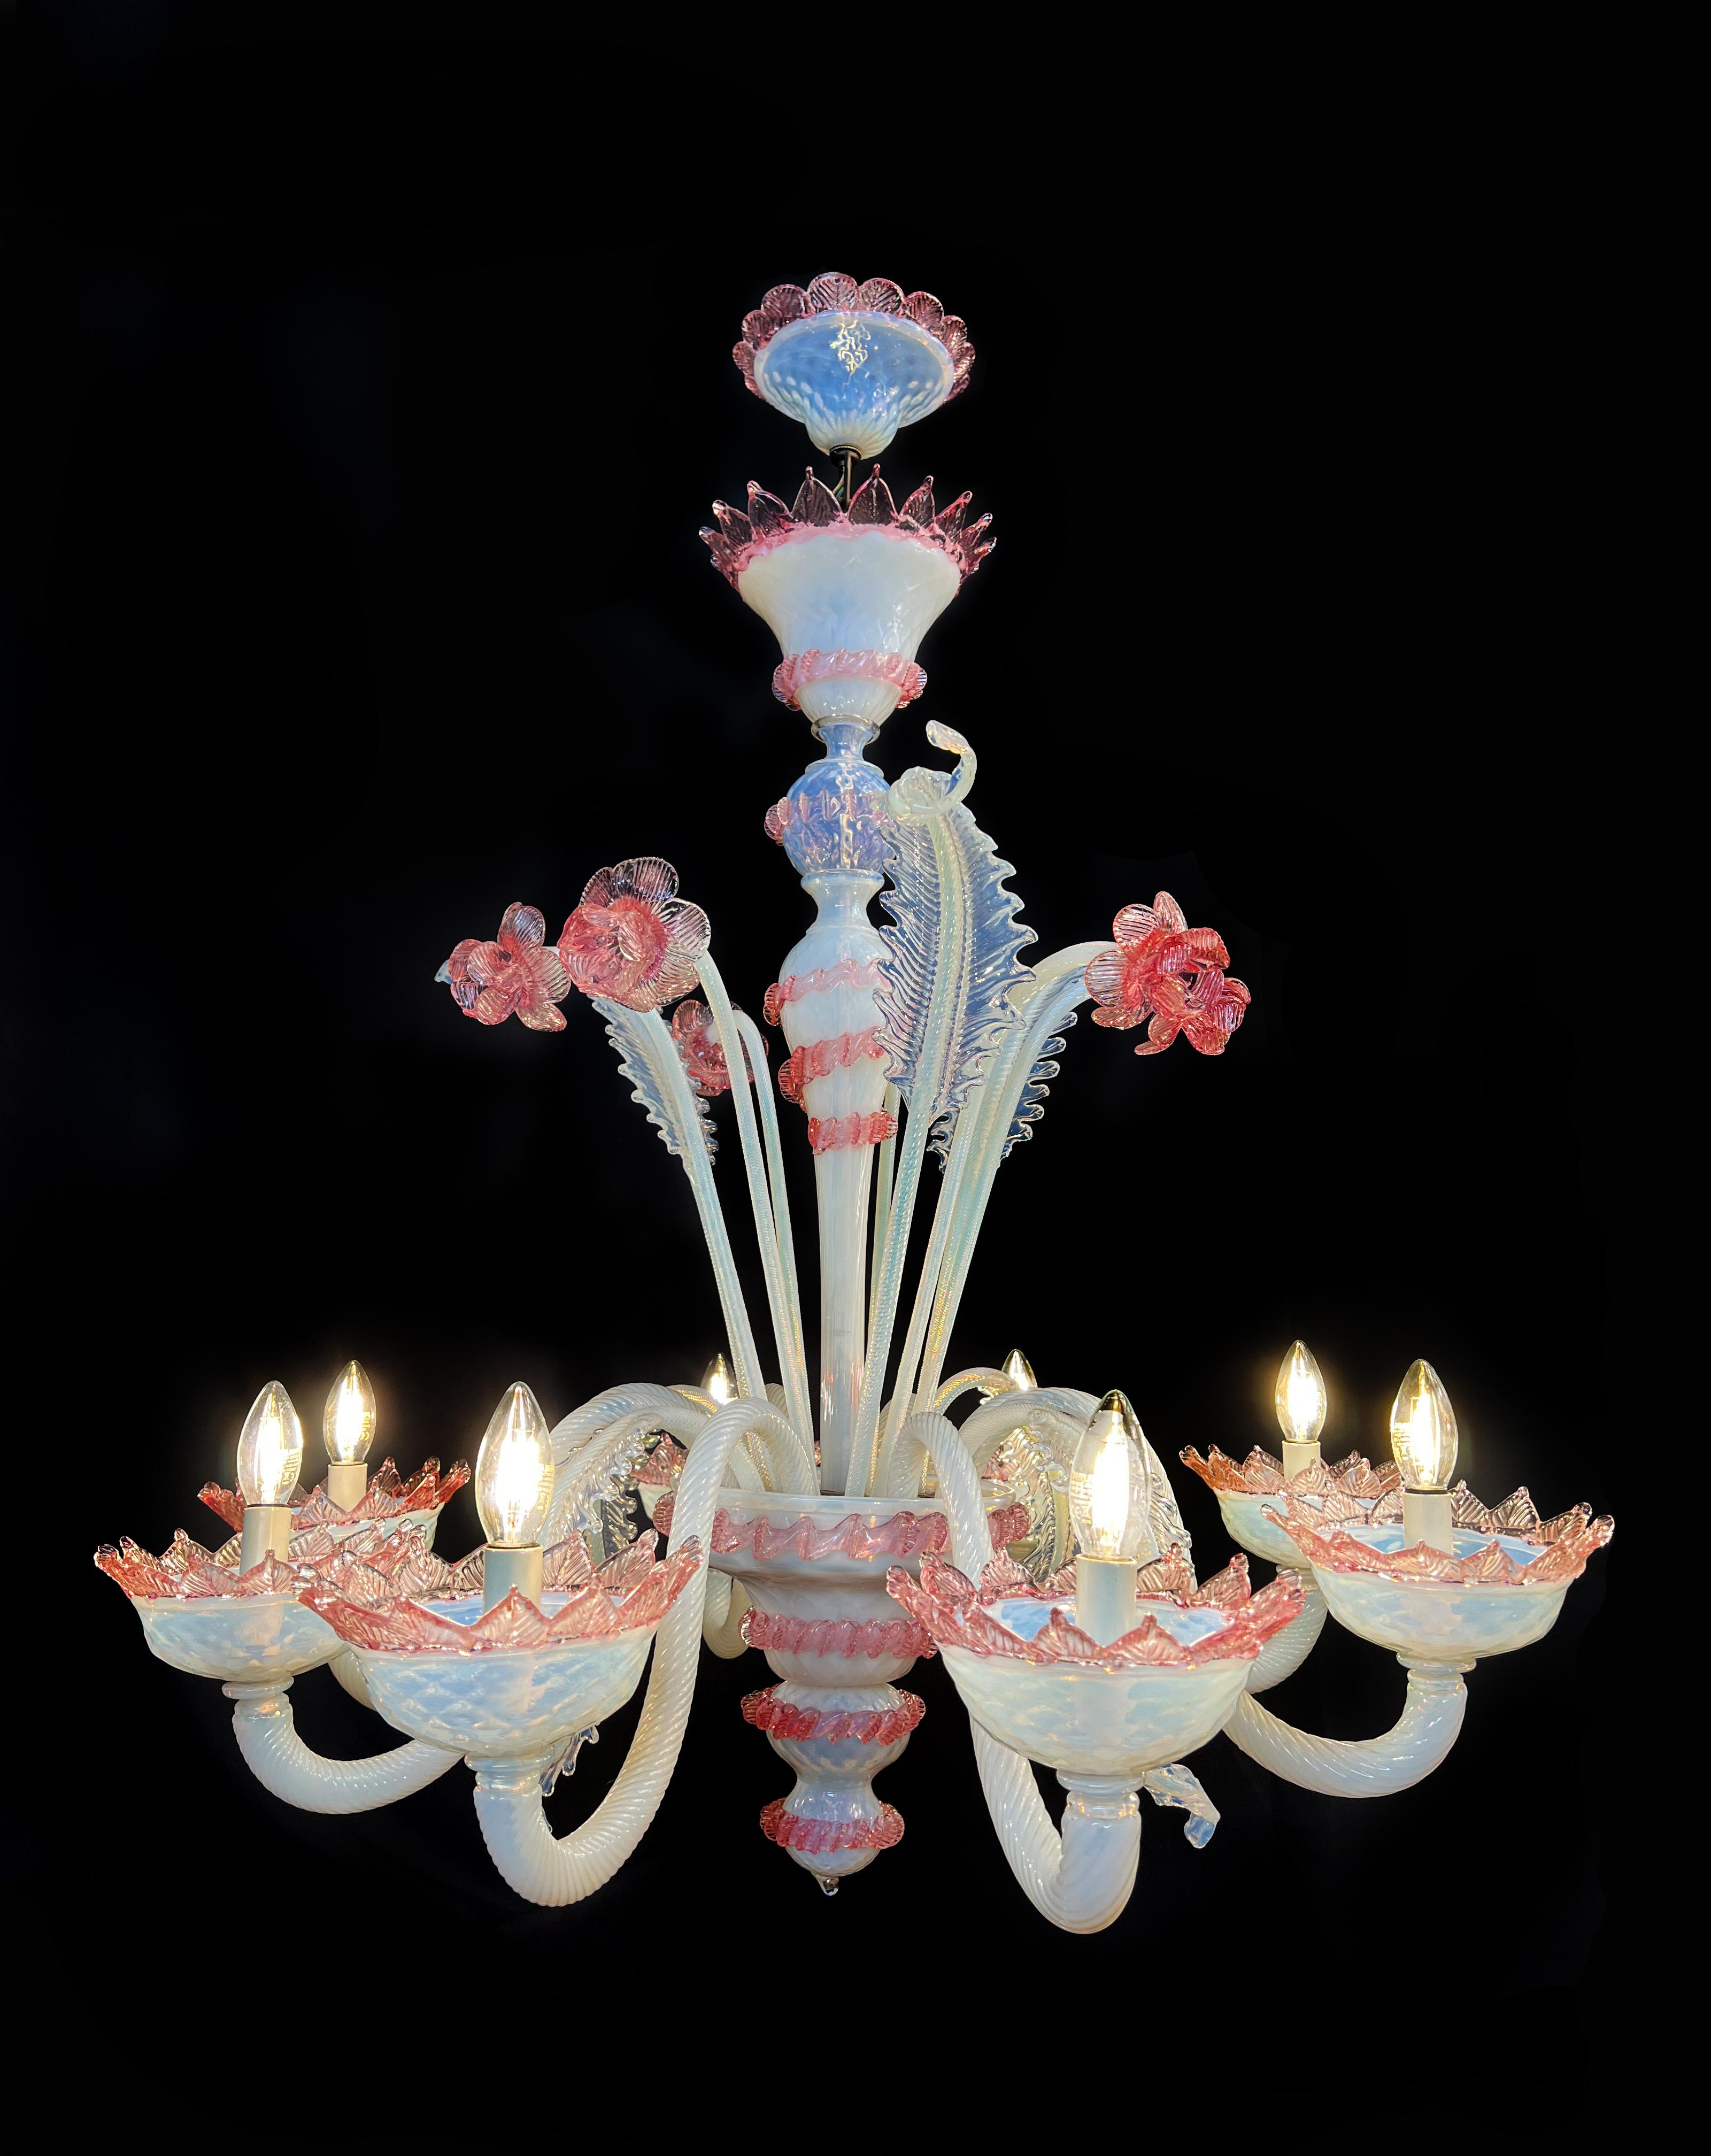 Trio Murano chandelier of awesome beauty. 
1) Lights (8) flowers and leaves in pure Murano glass paste. 
Dimensions: Height: 47.25 in (120 cm)Diameter: 27.56 in (70 cm)
2) Lights (8) flowers and leaves in pure Murano glass. 
Dimensions: Height: